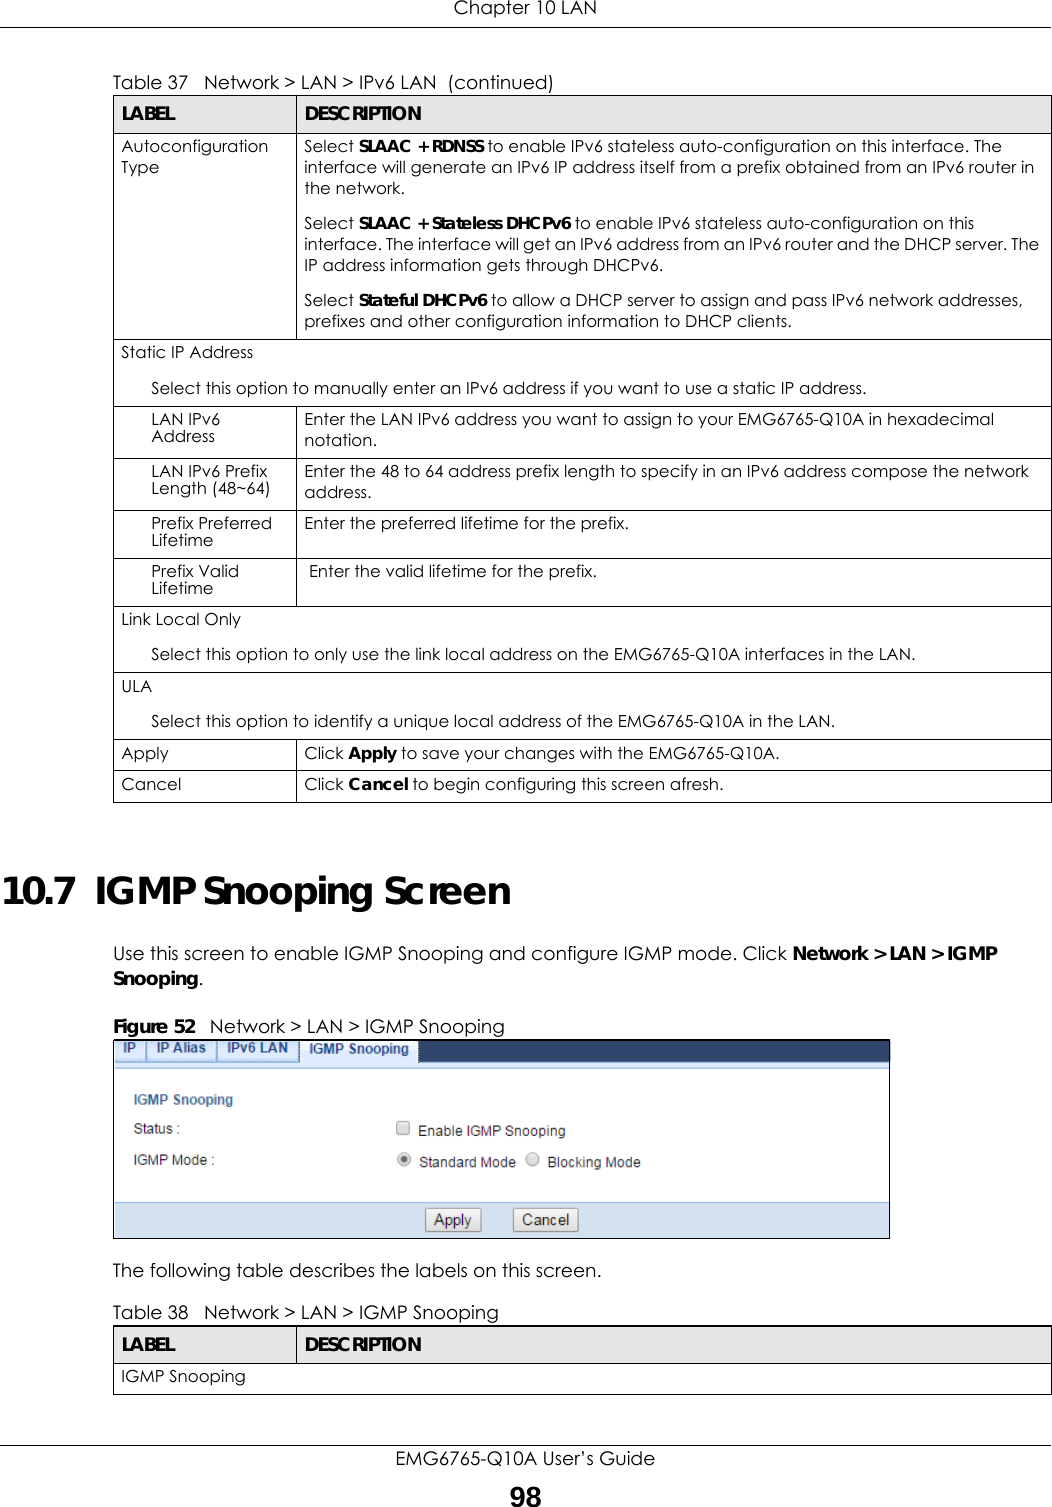 Chapter 10 LANEMG6765-Q10A User’s Guide9810.7  IGMP Snooping ScreenUse this screen to enable IGMP Snooping and configure IGMP mode. Click Network &gt; LAN &gt; IGMP Snooping.Figure 52   Network &gt; LAN &gt; IGMP SnoopingThe following table describes the labels on this screen.Autoconfiguration TypeSelect SLAAC + RDNSS to enable IPv6 stateless auto-configuration on this interface. The interface will generate an IPv6 IP address itself from a prefix obtained from an IPv6 router in the network.Select SLAAC + Stateless DHCPv6 to enable IPv6 stateless auto-configuration on this interface. The interface will get an IPv6 address from an IPv6 router and the DHCP server. The IP address information gets through DHCPv6.Select Stateful DHCPv6 to allow a DHCP server to assign and pass IPv6 network addresses, prefixes and other configuration information to DHCP clients.Static IP AddressSelect this option to manually enter an IPv6 address if you want to use a static IP address.LAN IPv6 Address Enter the LAN IPv6 address you want to assign to your EMG6765-Q10A in hexadecimal notation.LAN IPv6 Prefix Length (48~64) Enter the 48 to 64 address prefix length to specify in an IPv6 address compose the network address.Prefix Preferred Lifetime Enter the preferred lifetime for the prefix.Prefix Valid Lifetime  Enter the valid lifetime for the prefix.Link Local OnlySelect this option to only use the link local address on the EMG6765-Q10A interfaces in the LAN.ULASelect this option to identify a unique local address of the EMG6765-Q10A in the LAN.  Apply Click Apply to save your changes with the EMG6765-Q10A.Cancel Click Cancel to begin configuring this screen afresh.Table 37   Network &gt; LAN &gt; IPv6 LAN  (continued)LABEL DESCRIPTIONTable 38   Network &gt; LAN &gt; IGMP Snooping LABEL DESCRIPTIONIGMP Snooping